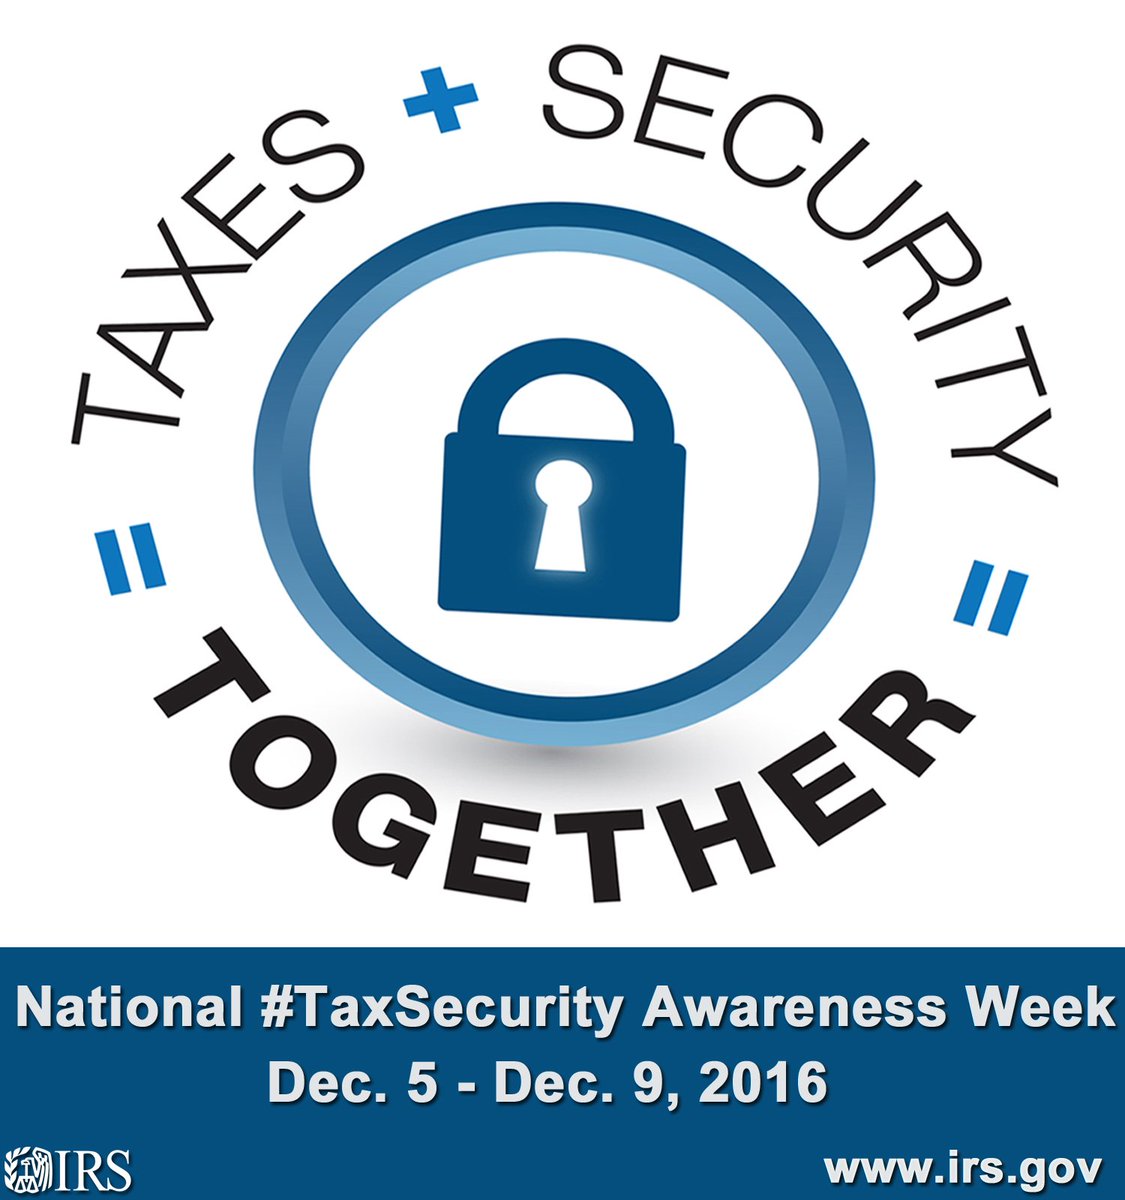 #IRS, Security Summit Partners, Remind Taxpayers to Protect Themselves Online. #TaxSecurity #tax go.usa.gov/x8EU7